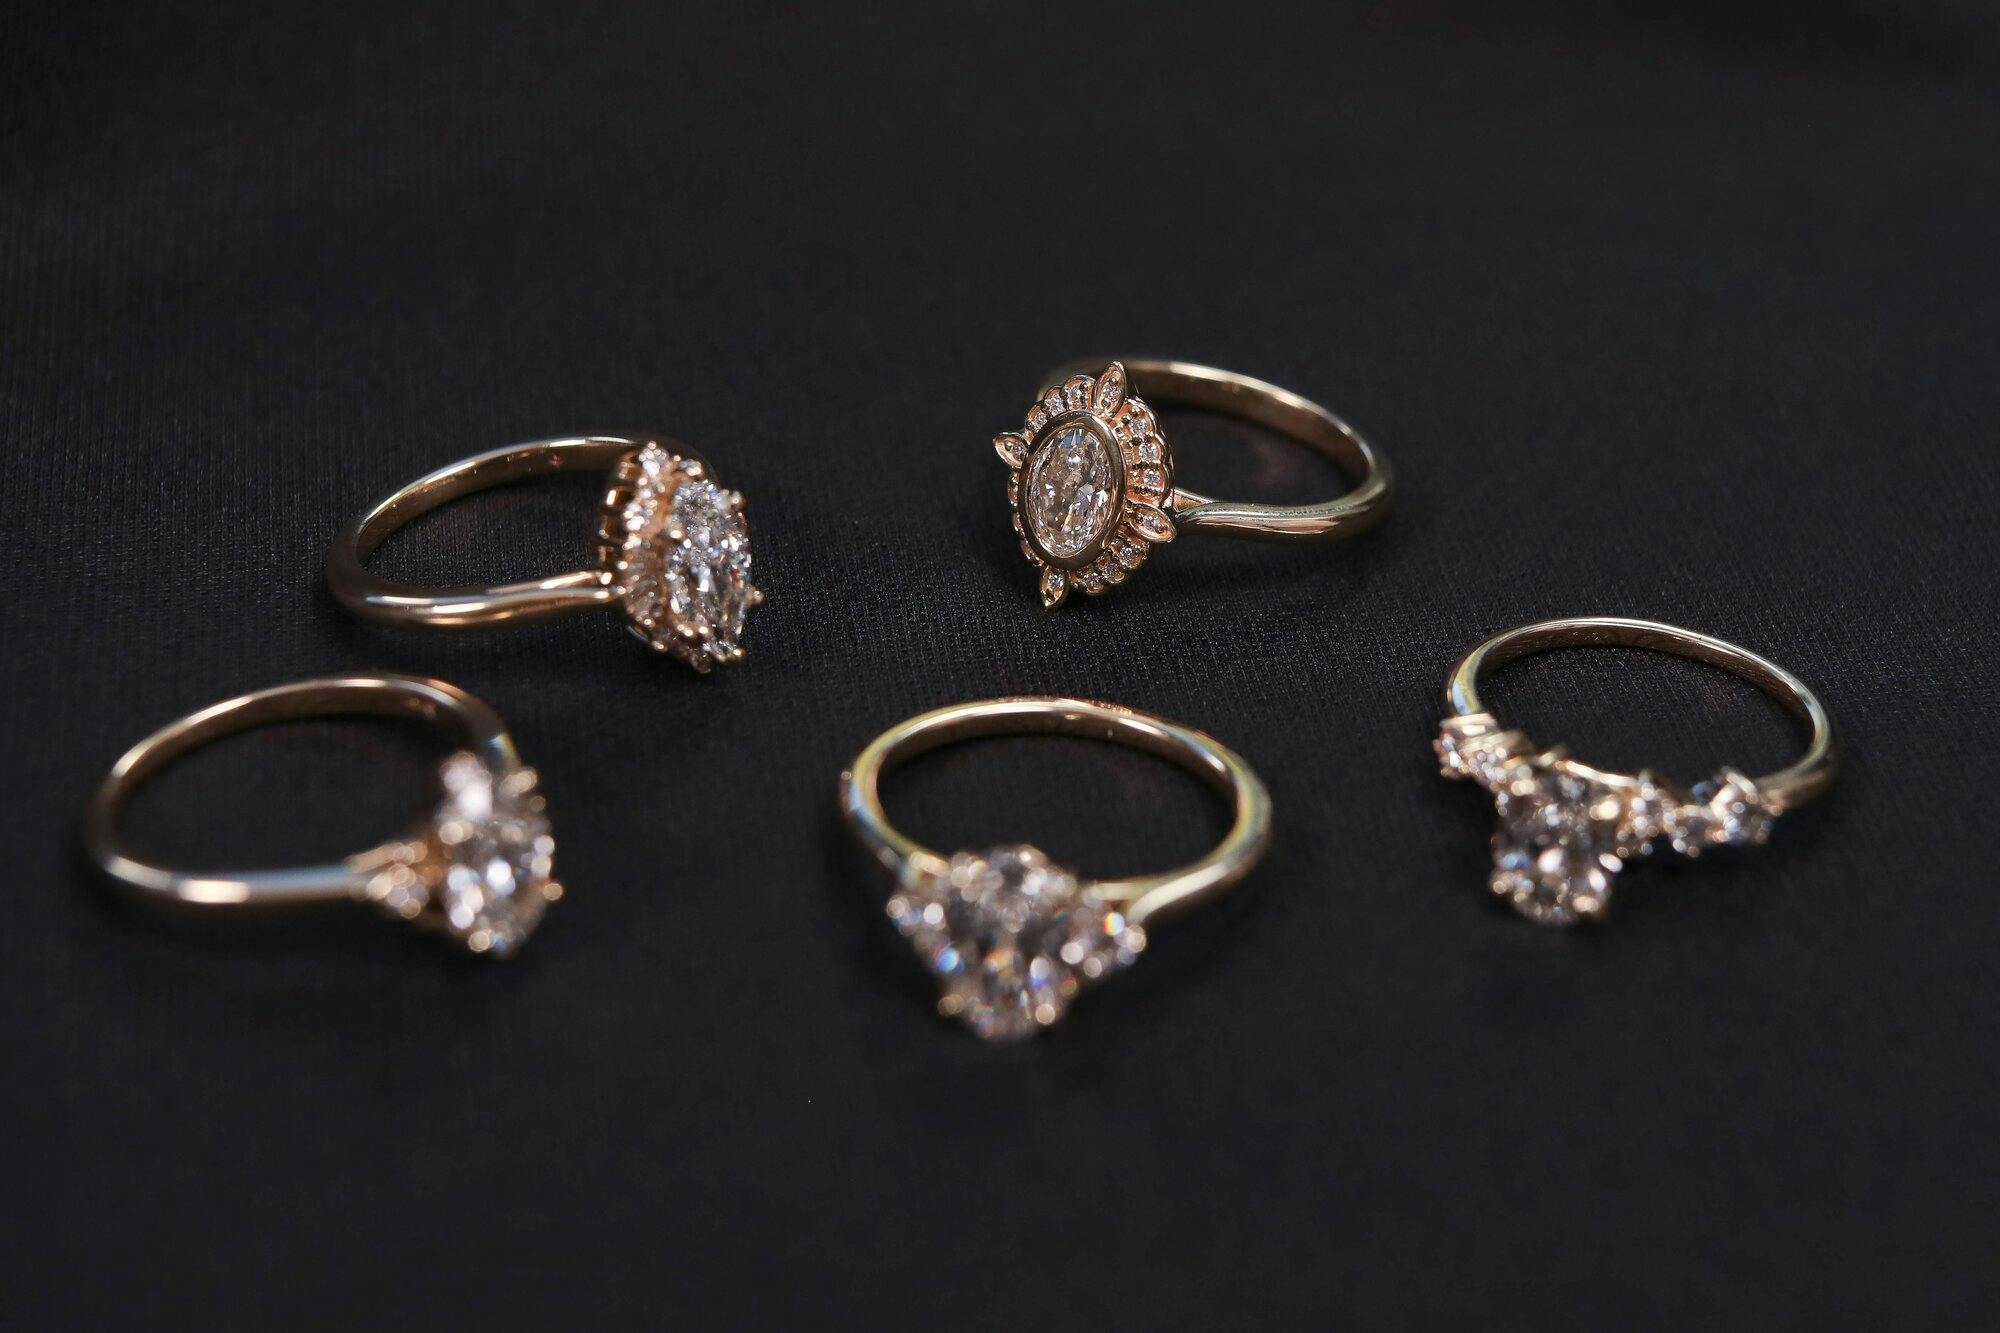 group shot of diamond engagement rings on a black fabric with one ring in focus and the rest in the background